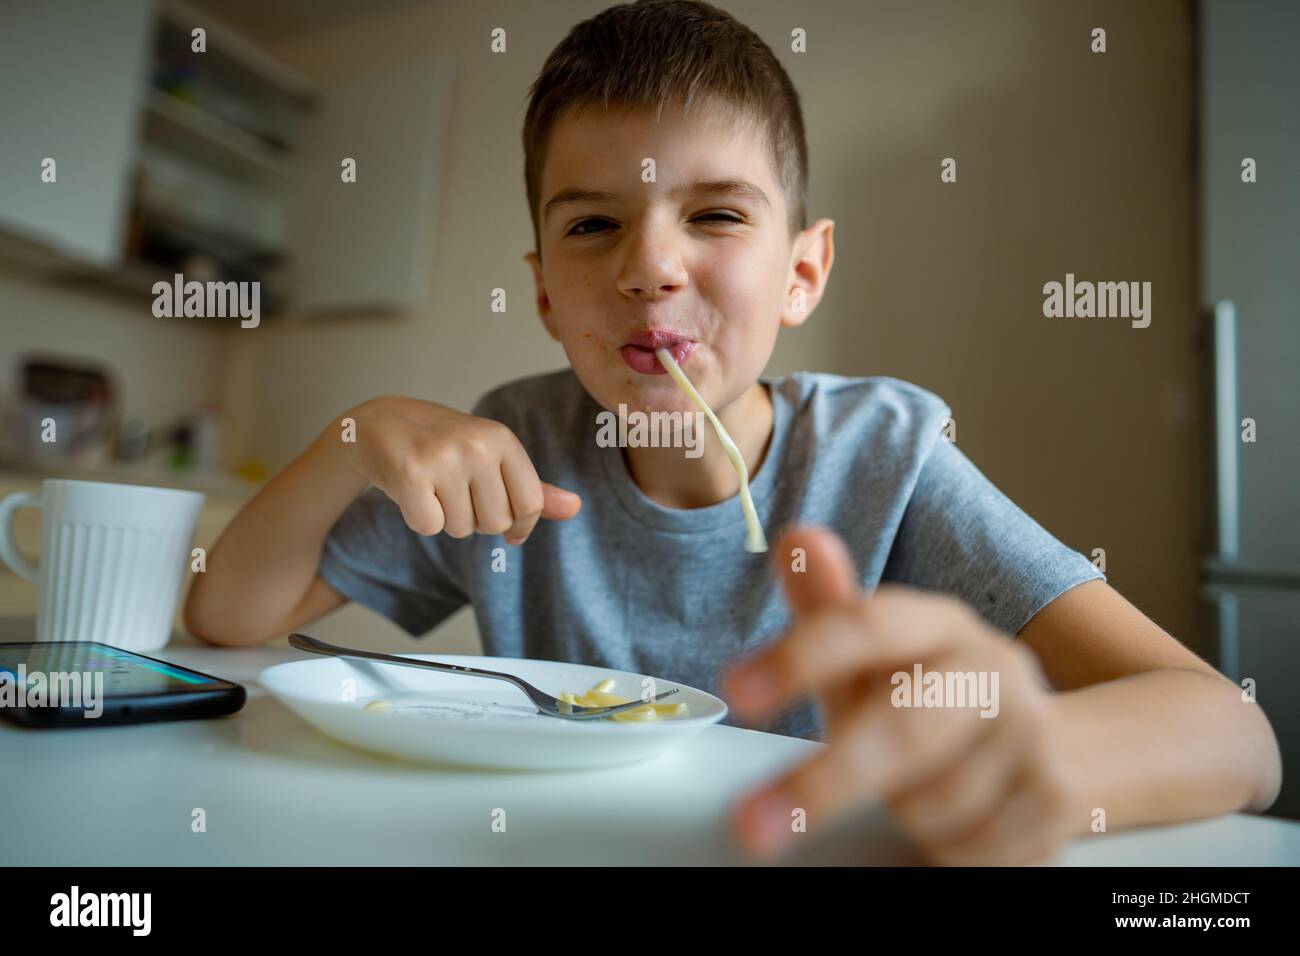 Cheerful, hungry boy eats pasta with appetite, retraction in pasta playfully Stock Photo